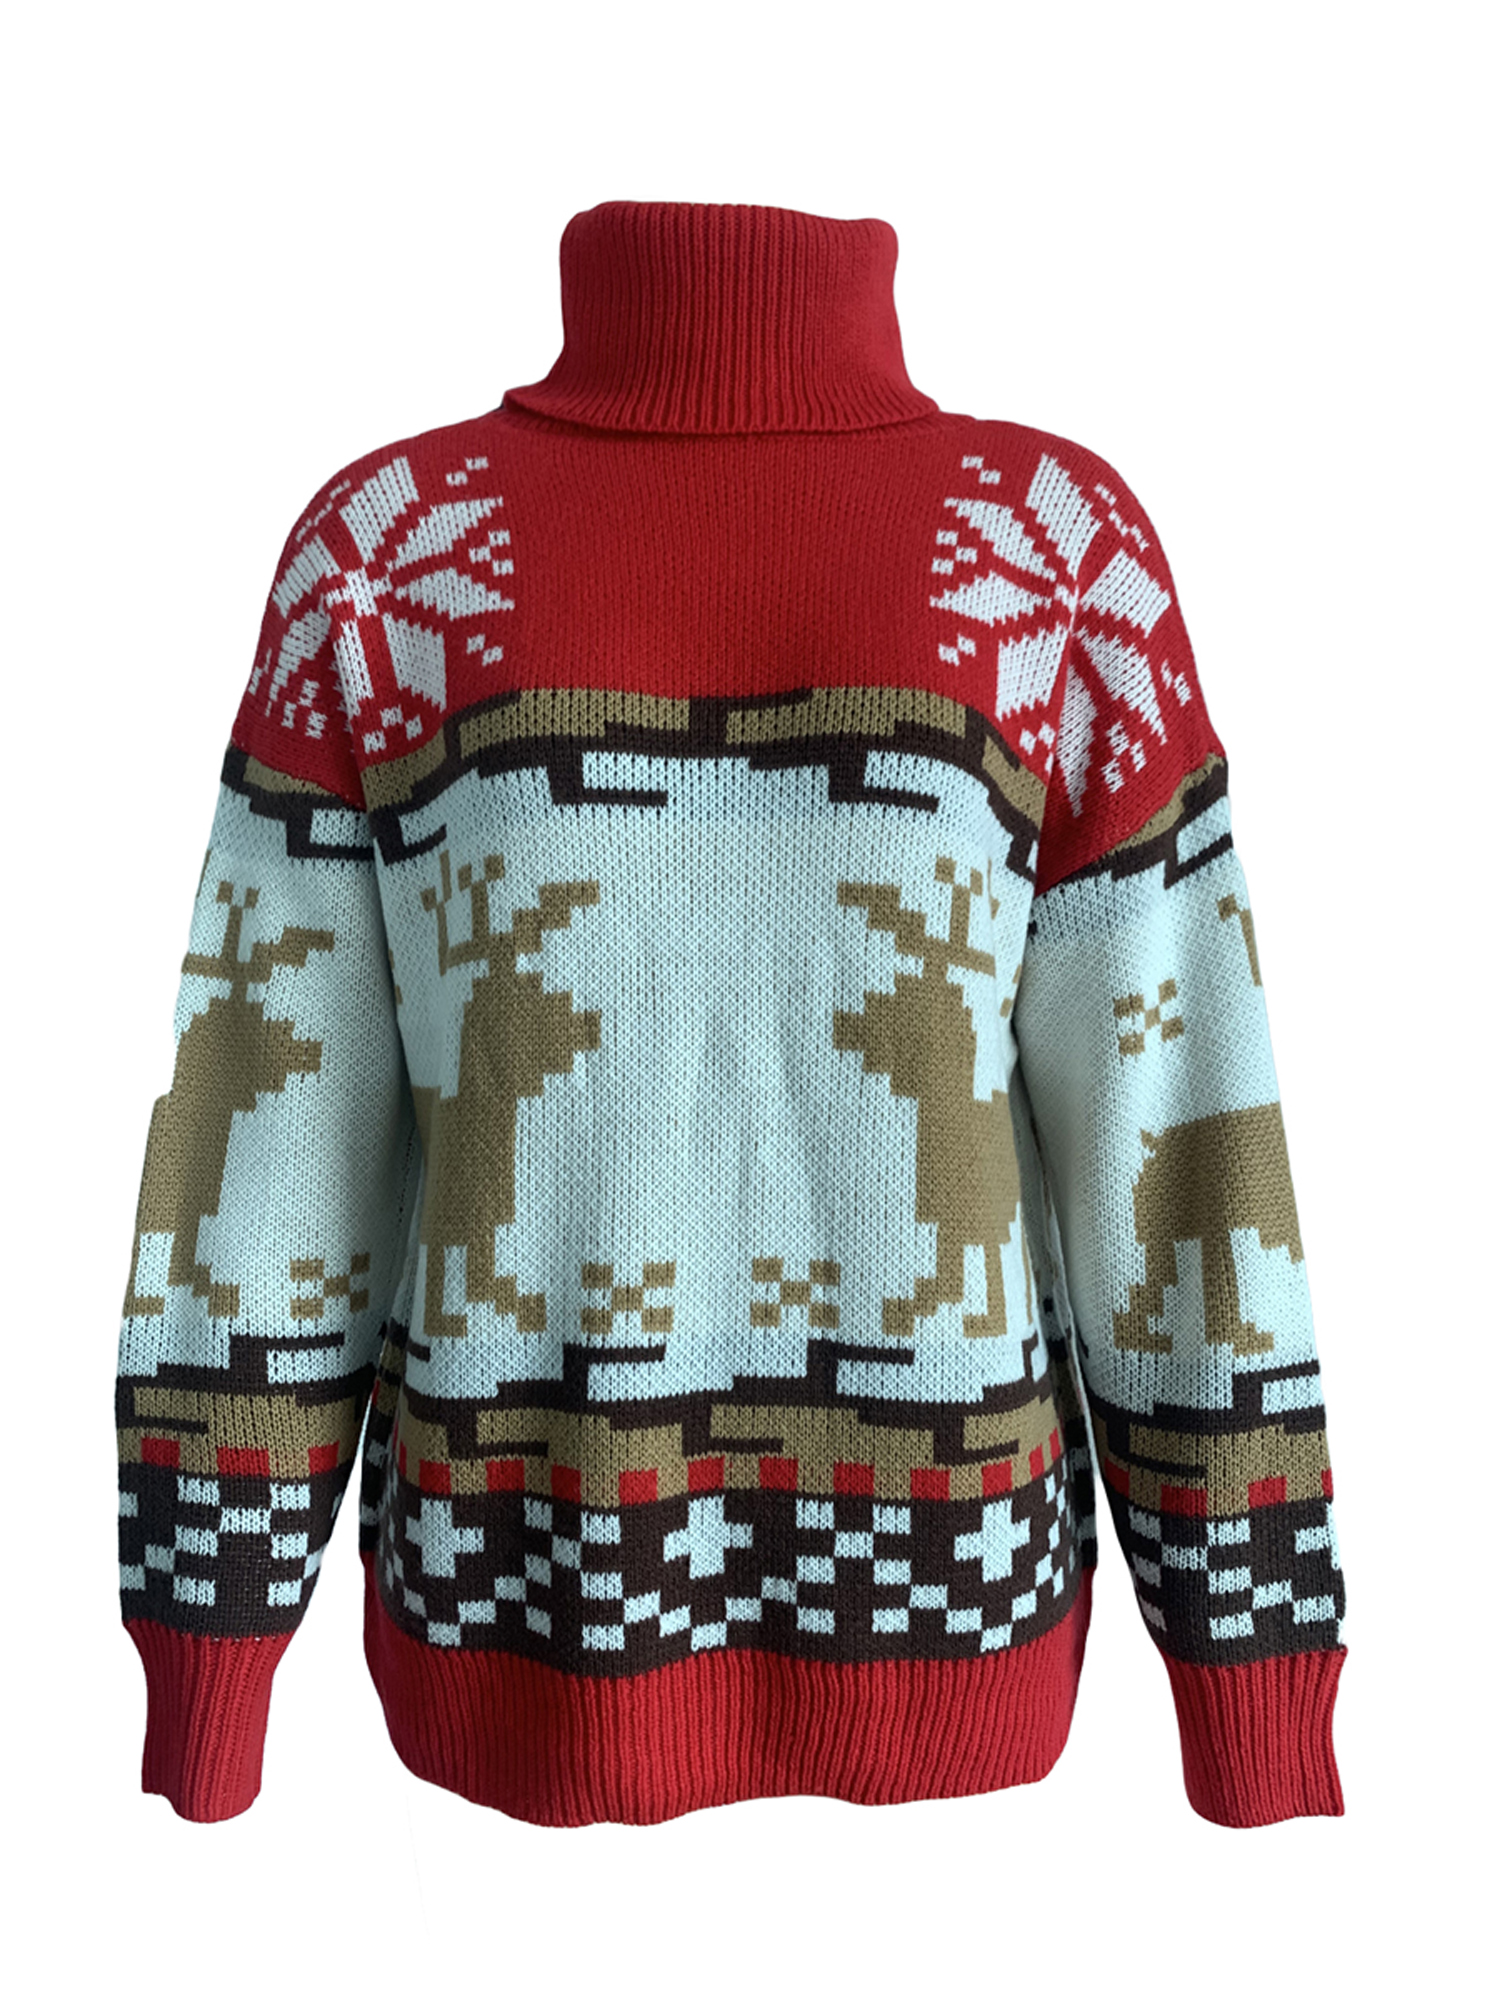 Canis Women's Christmas Round Neck Turtleneck Sweaters, Long Sleeve Elk Snowflake Print Loose Knit Tops - image 4 of 6